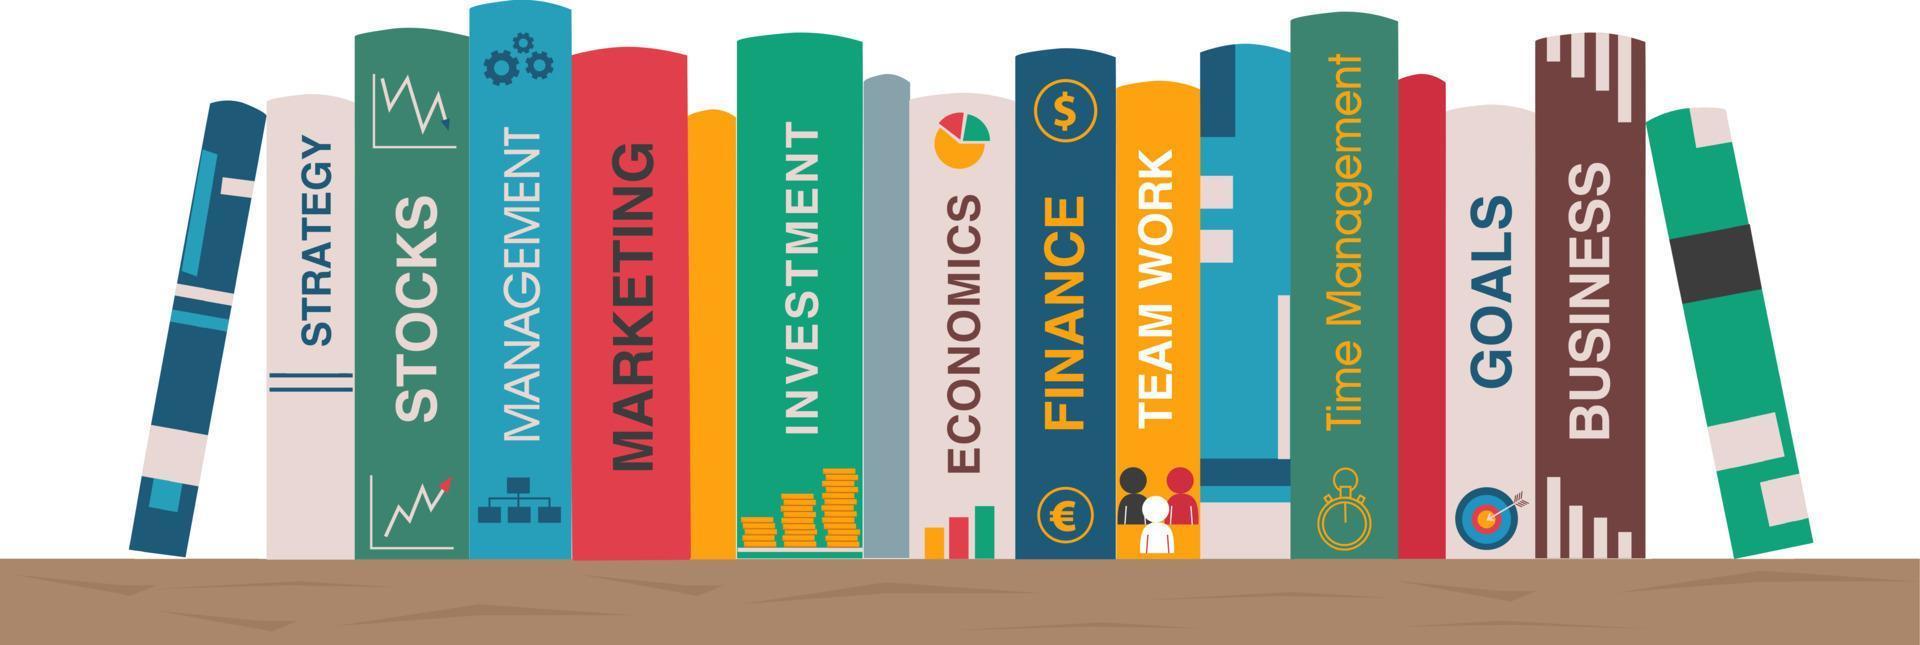 Bookshelf with business books.  Shelf with books about finance, marketing, management, strategy, goals, time management, team work. Banner for library, book store. Vector illustration in flat style.